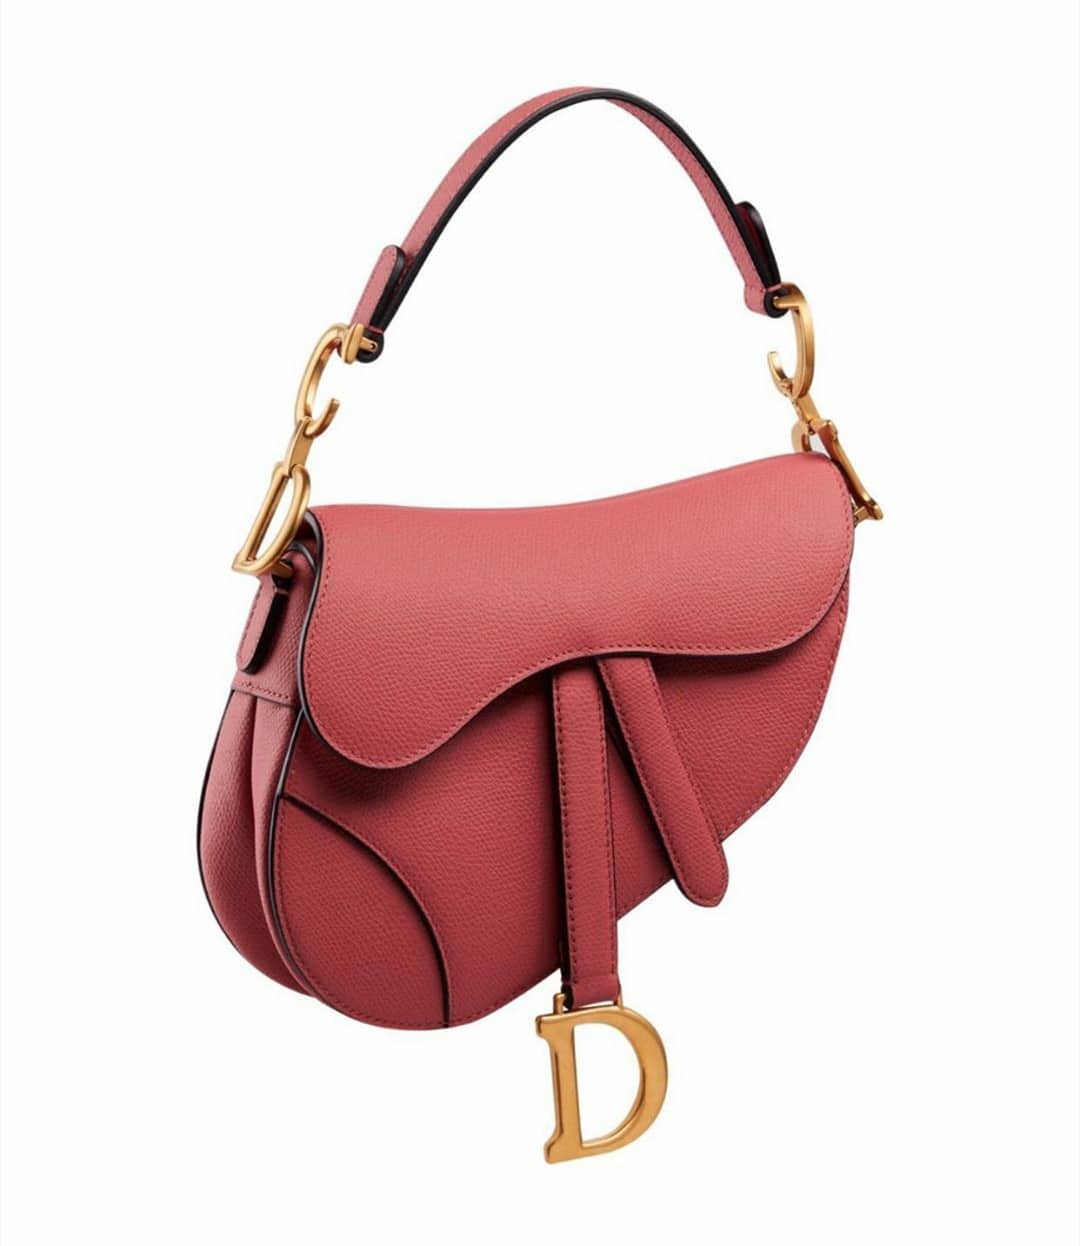 Dior Spring 2020 Bag Collection featuring new Small Book Totes Prints ...